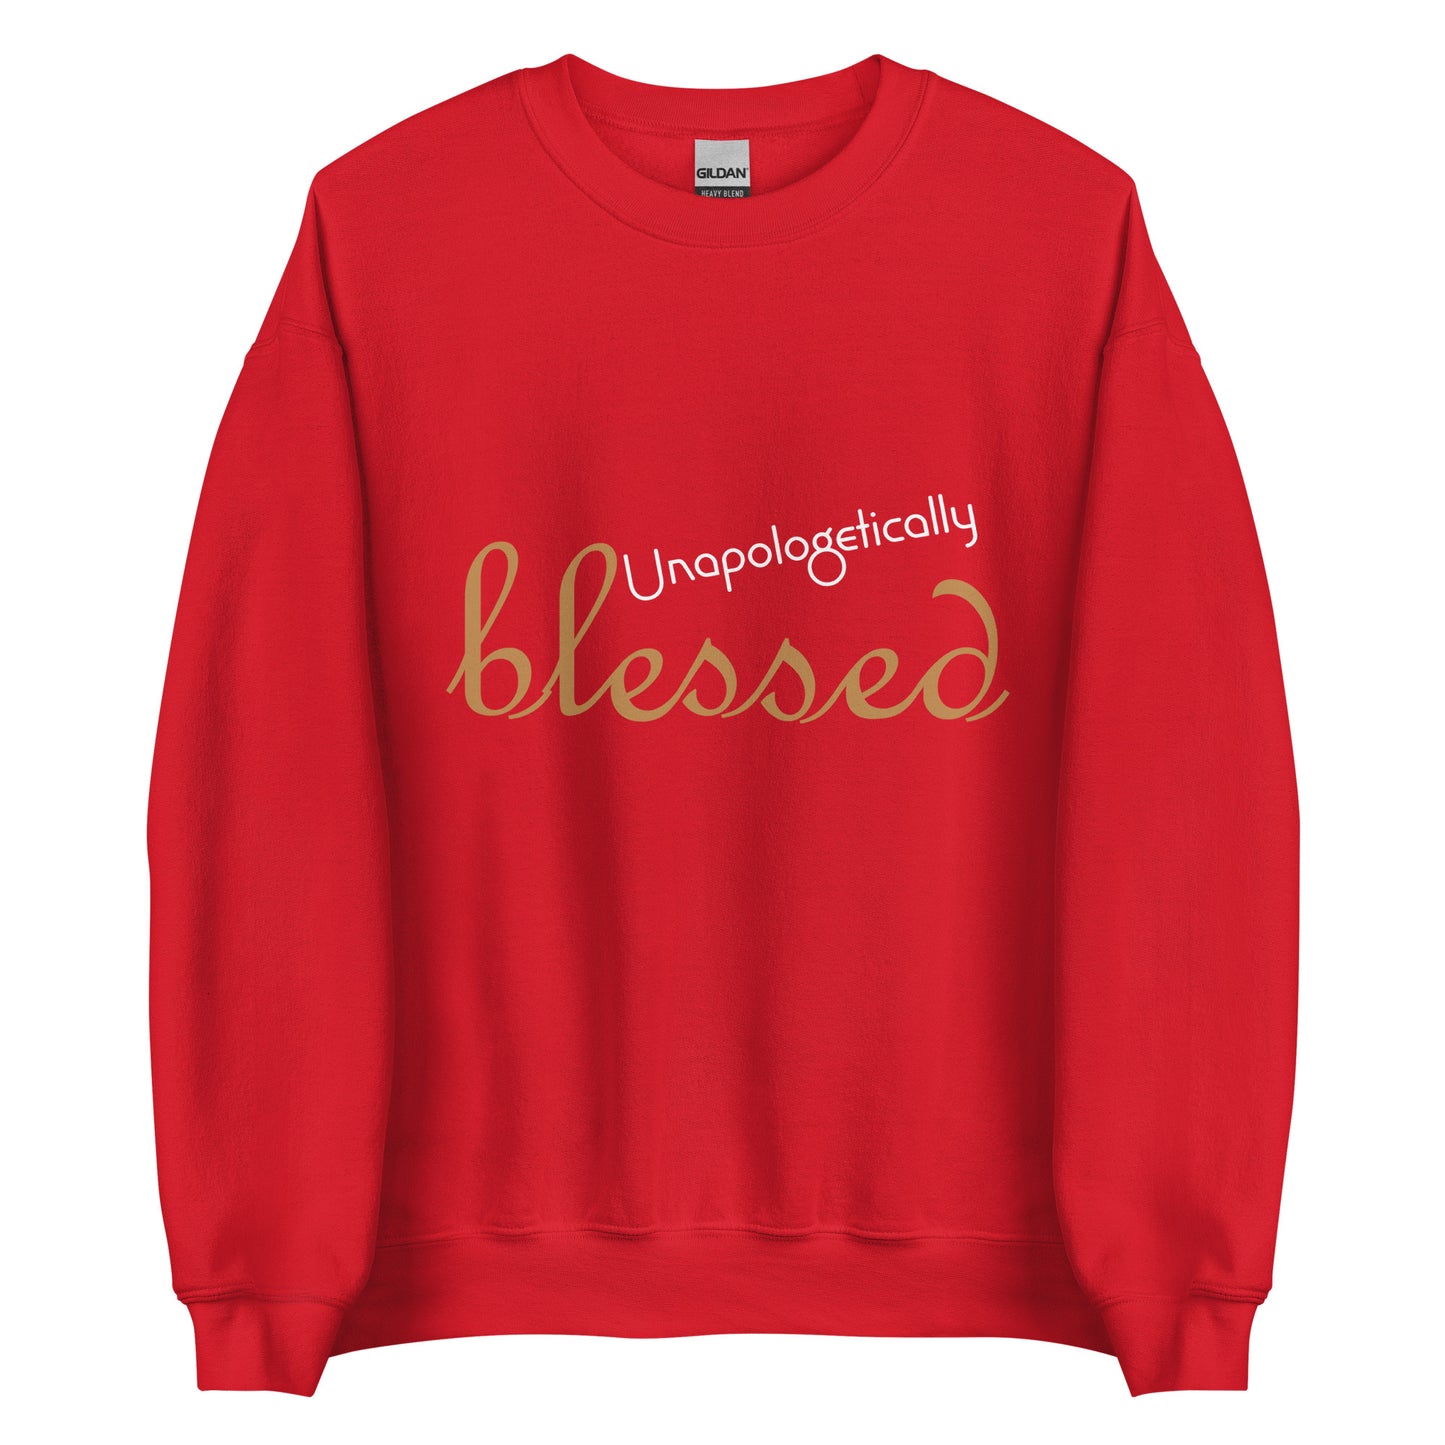 Unapologetically Blessed Sweatshirt